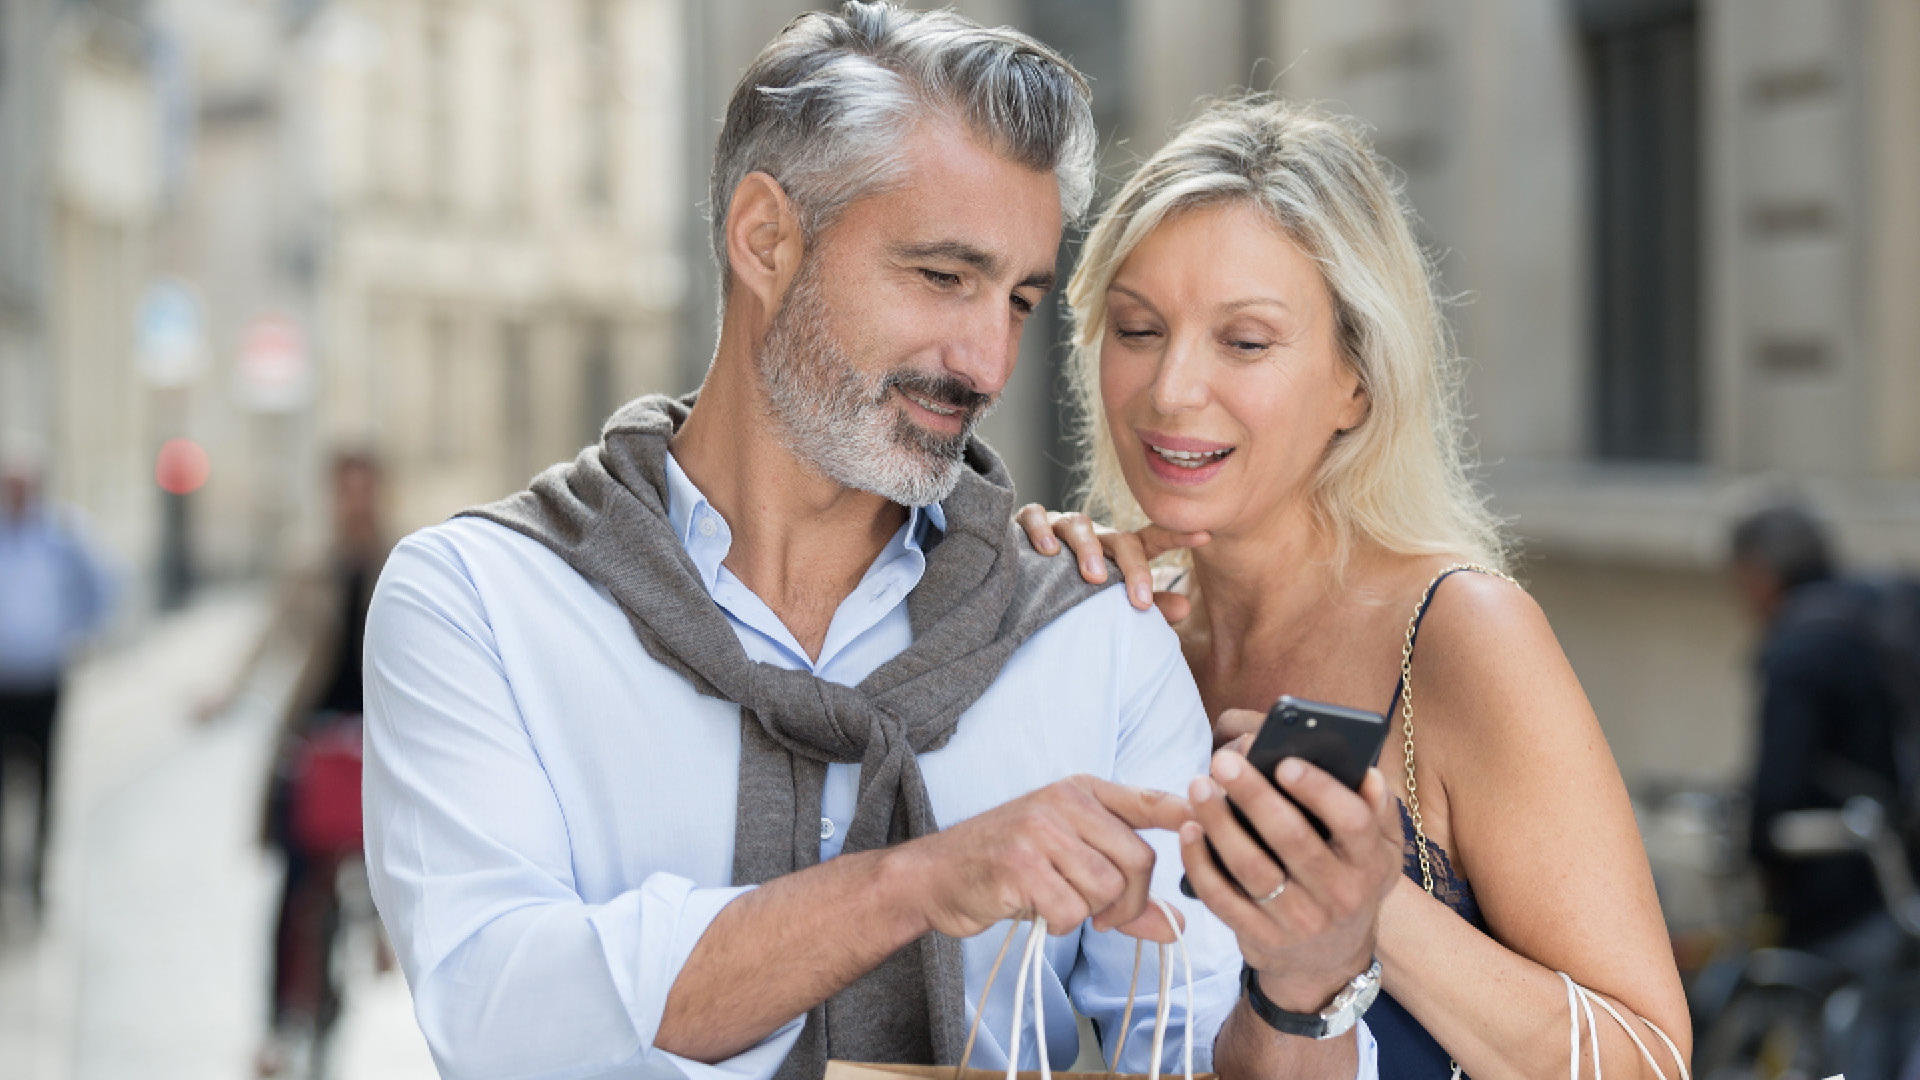 Couple With Smart Phone